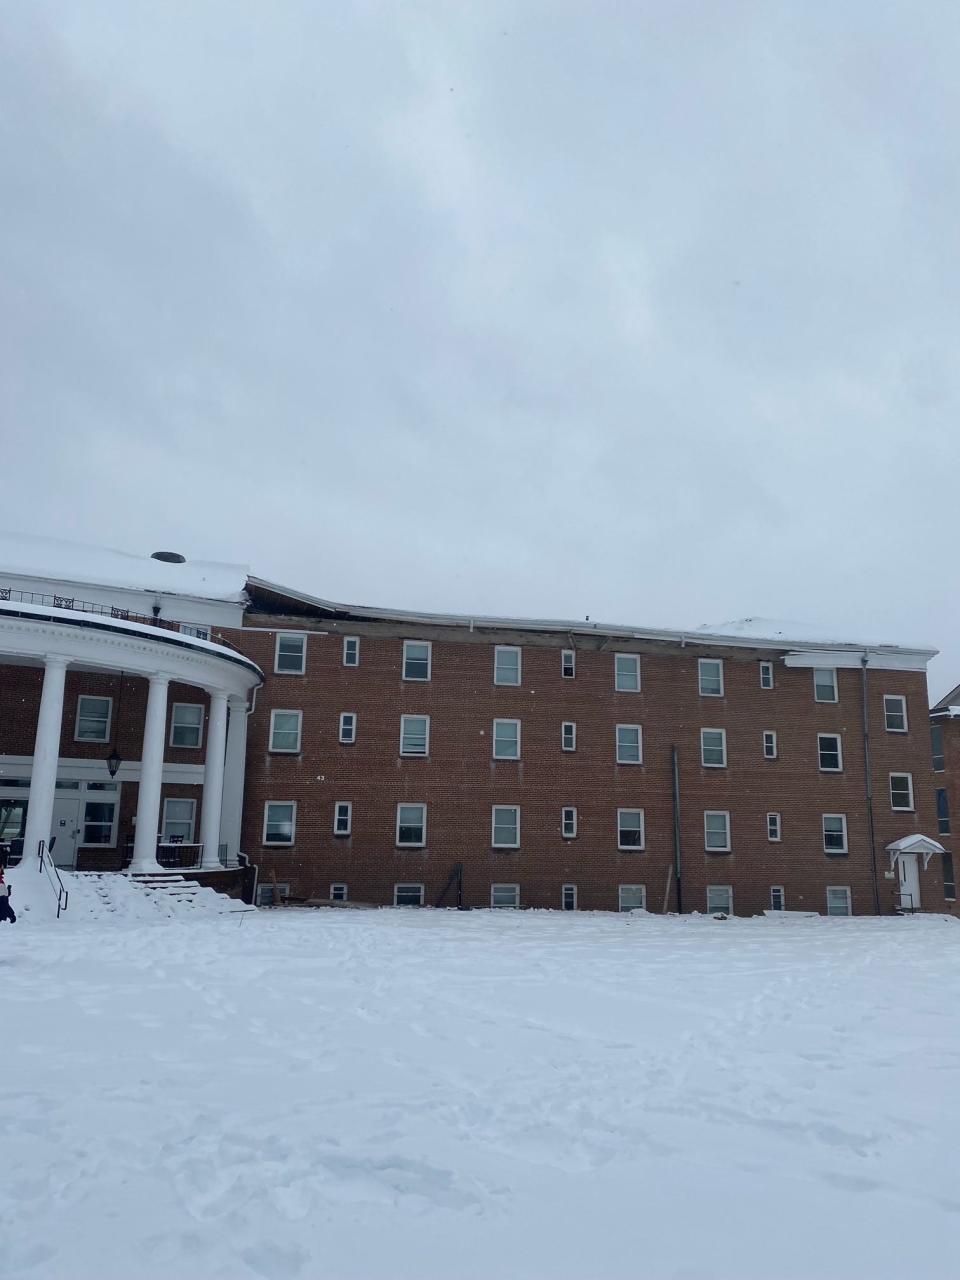 Jones Hall at Brevard College had a partial roof collapse Jan. 16, causing the evacuation of dozens of students.